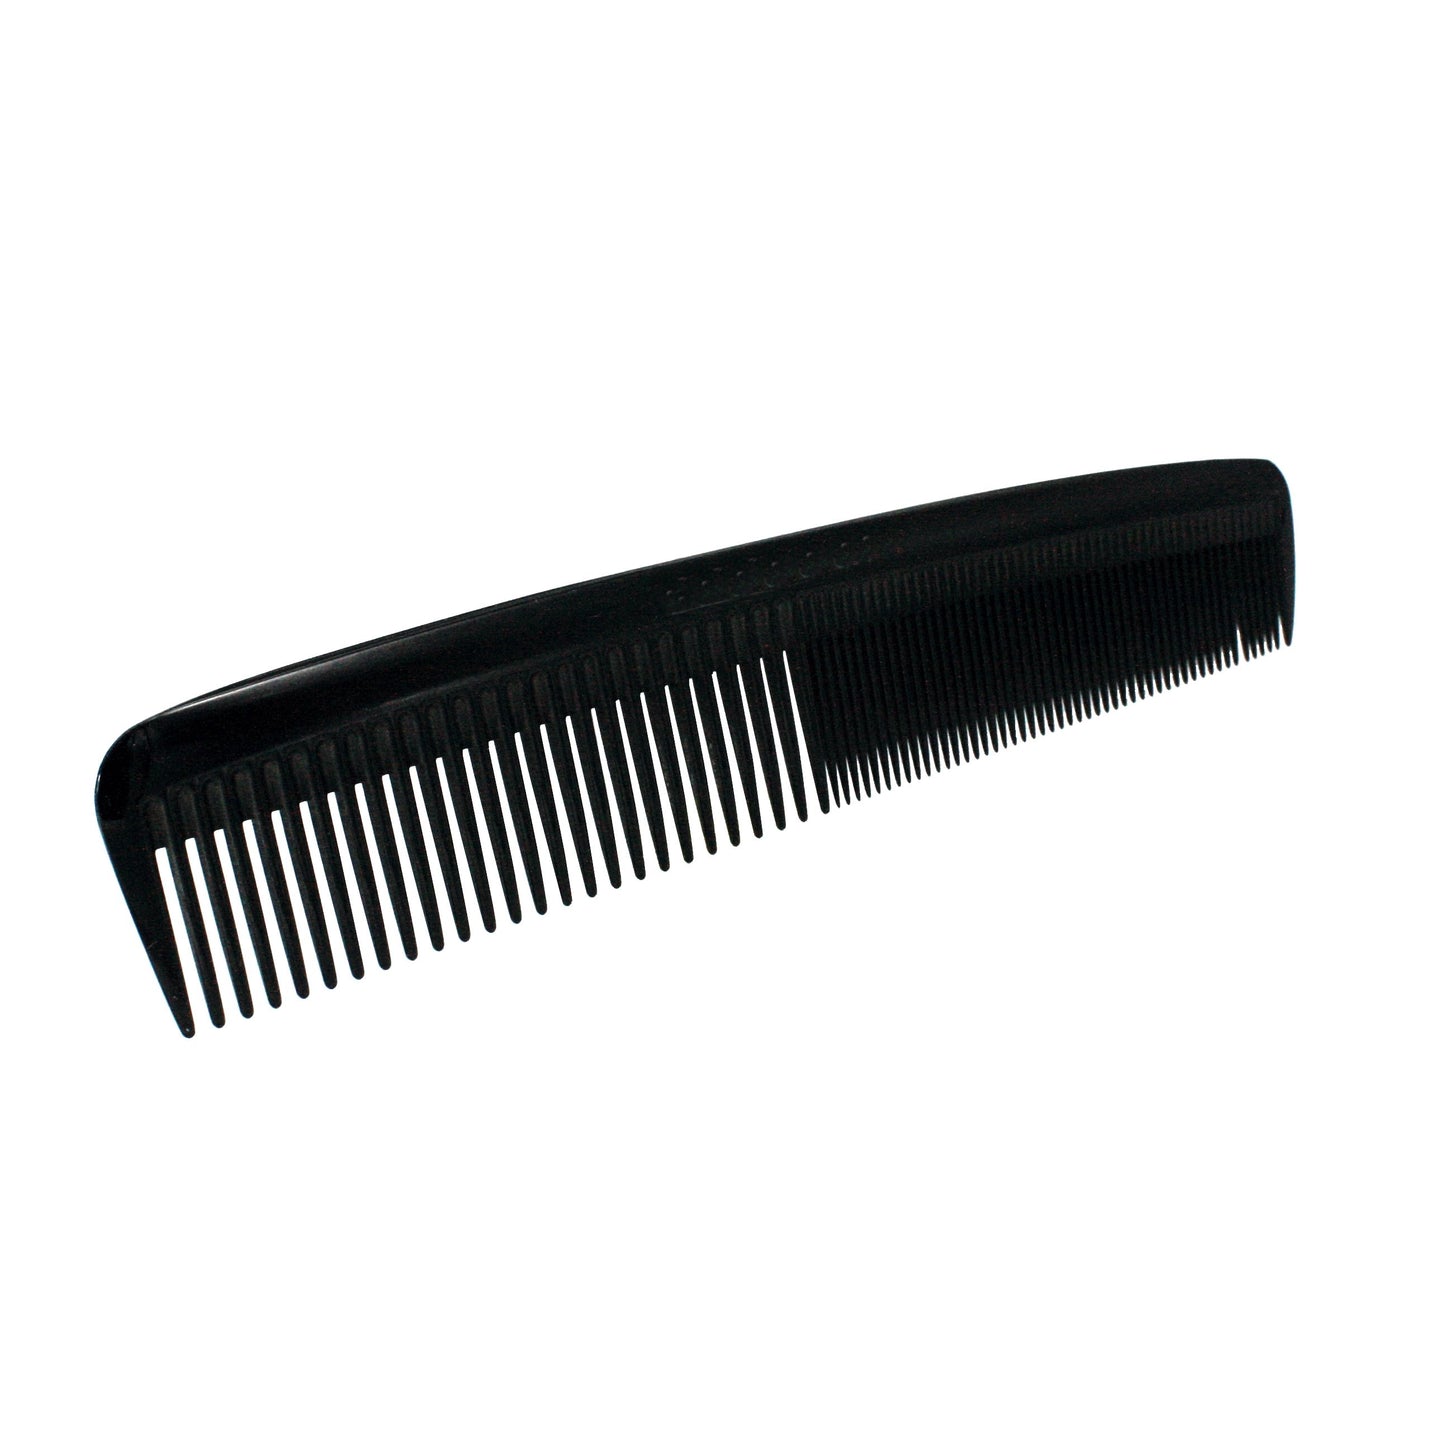 Pegasus 609, 8in Hard Rubber Heavy Styling Comb with Inch Marks, Seamless, Smooth Edges, Anti Static, Heat and Chemically Resistant, Portable Pocket Purse Dresser Comb | Peines de goma dura - Black